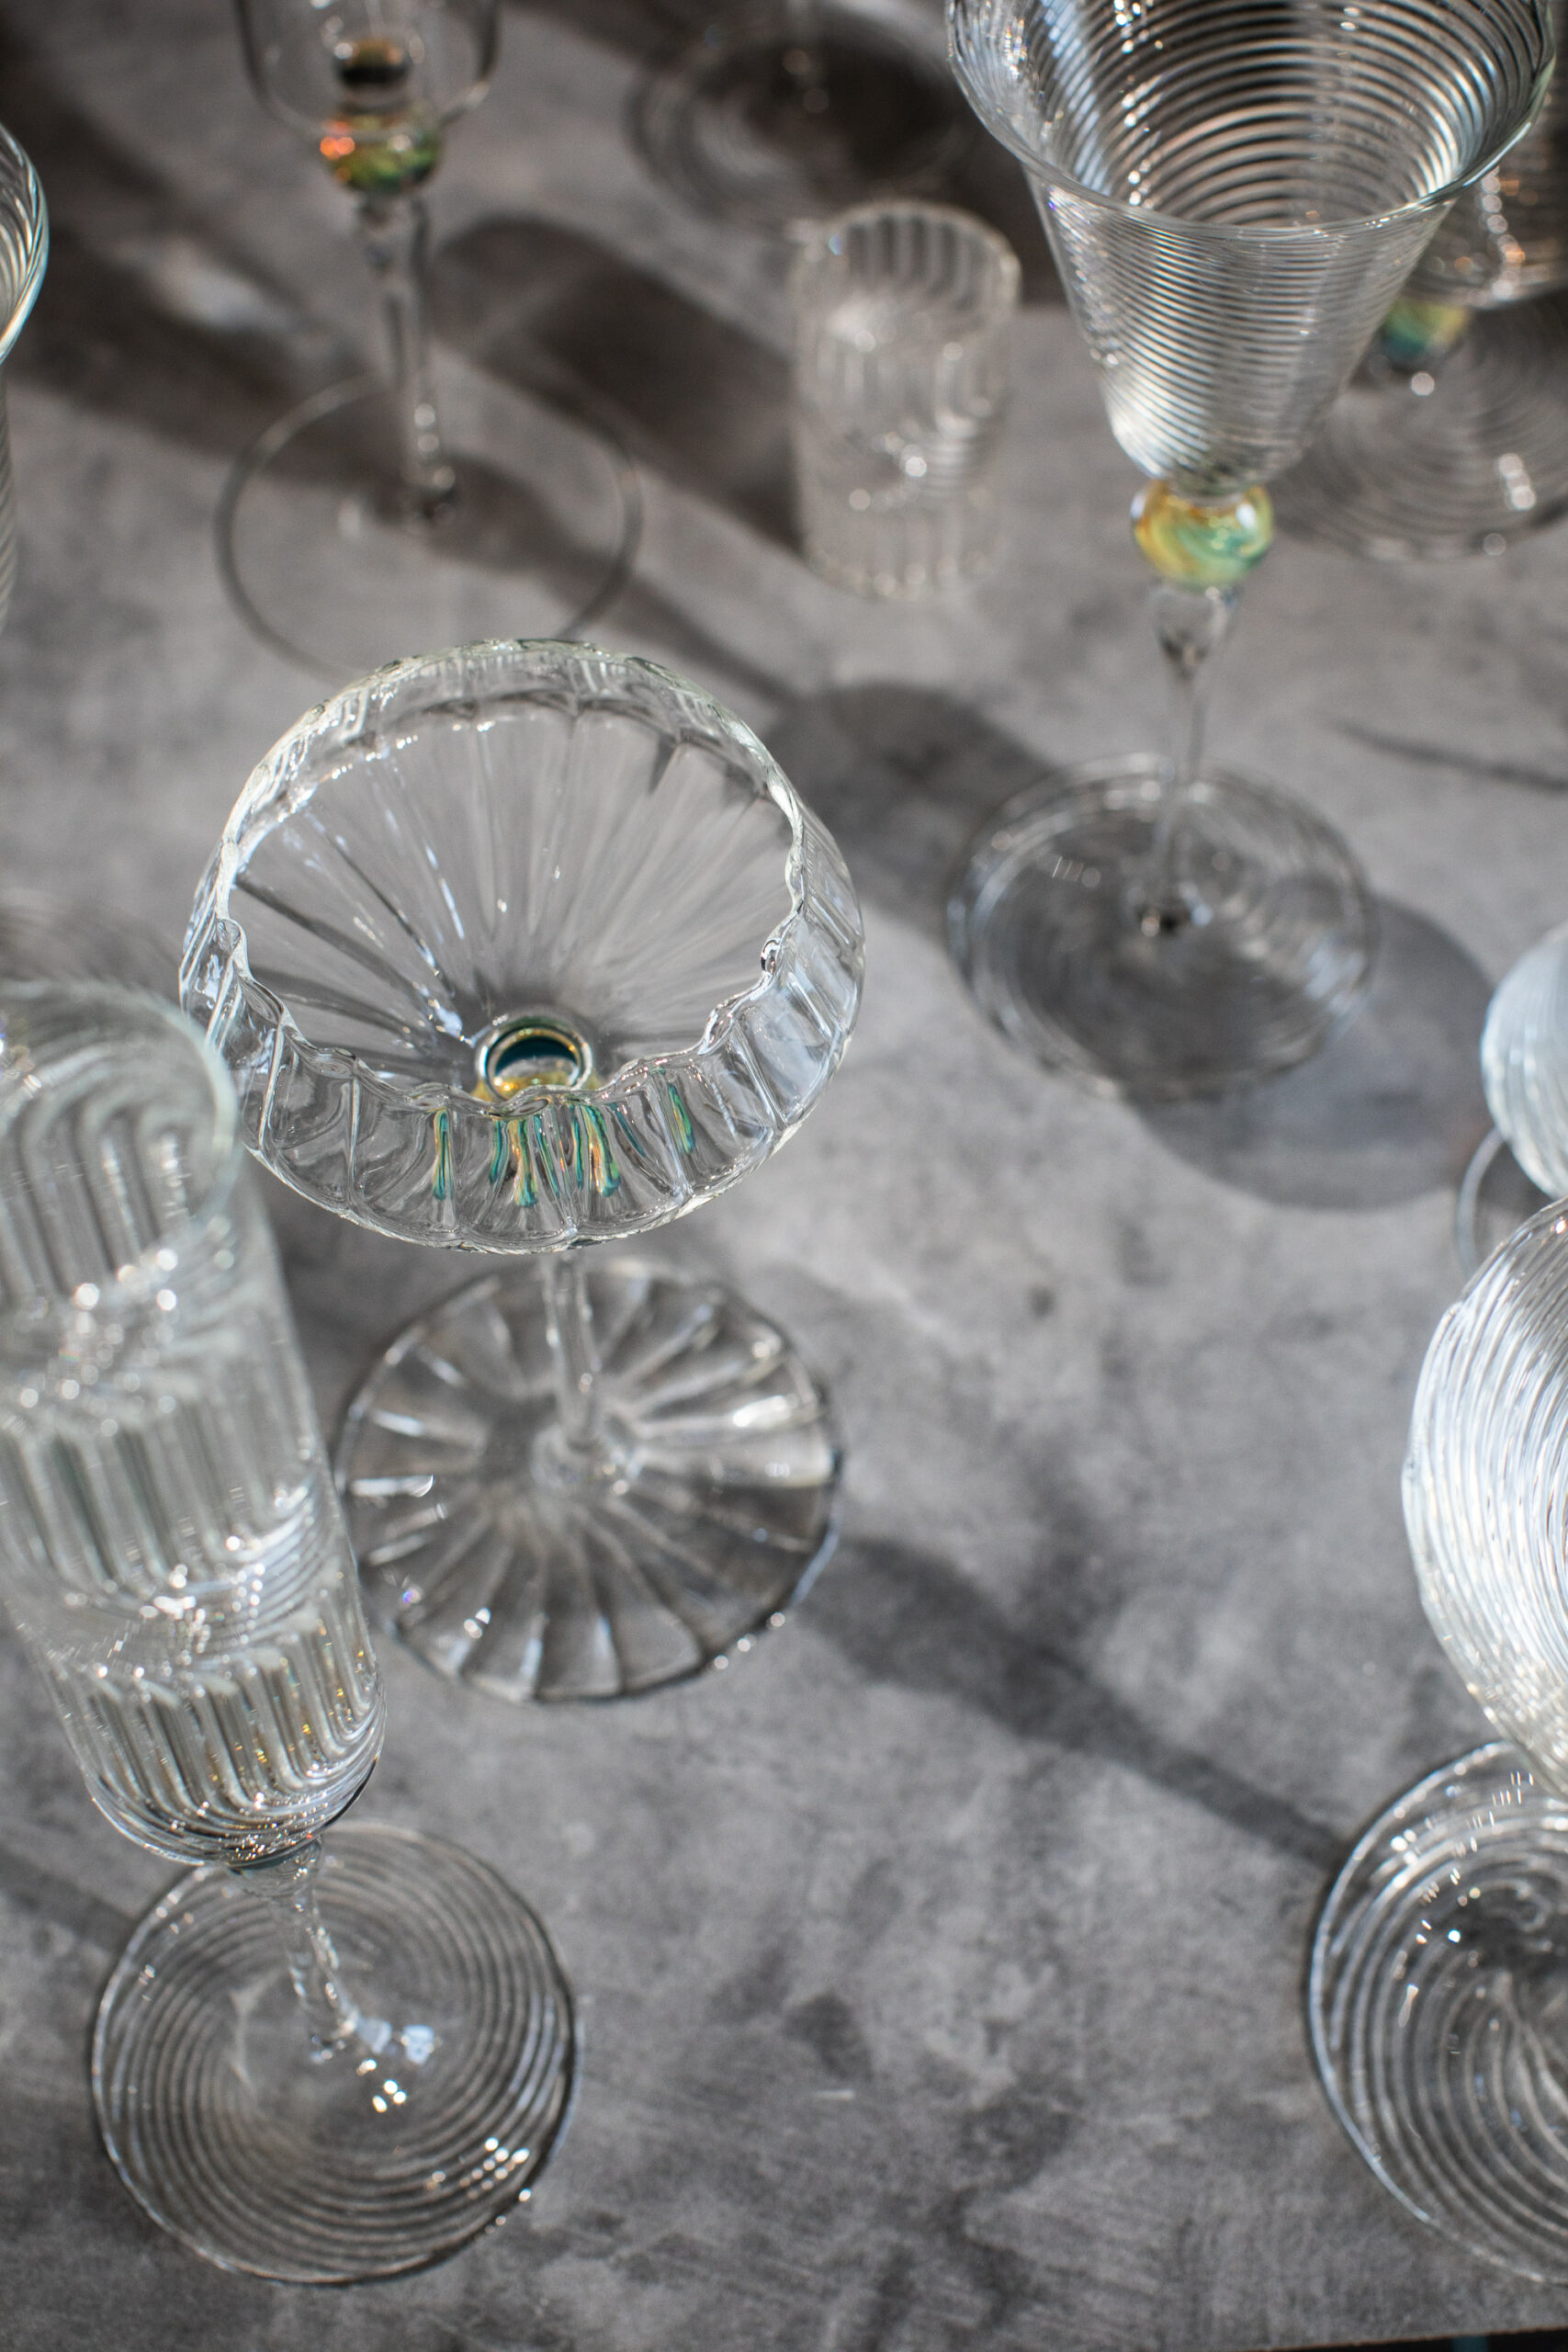 Delicate handblown champagne flutes and cordial glasses sparkle for the holiday. (Eileen Roche)